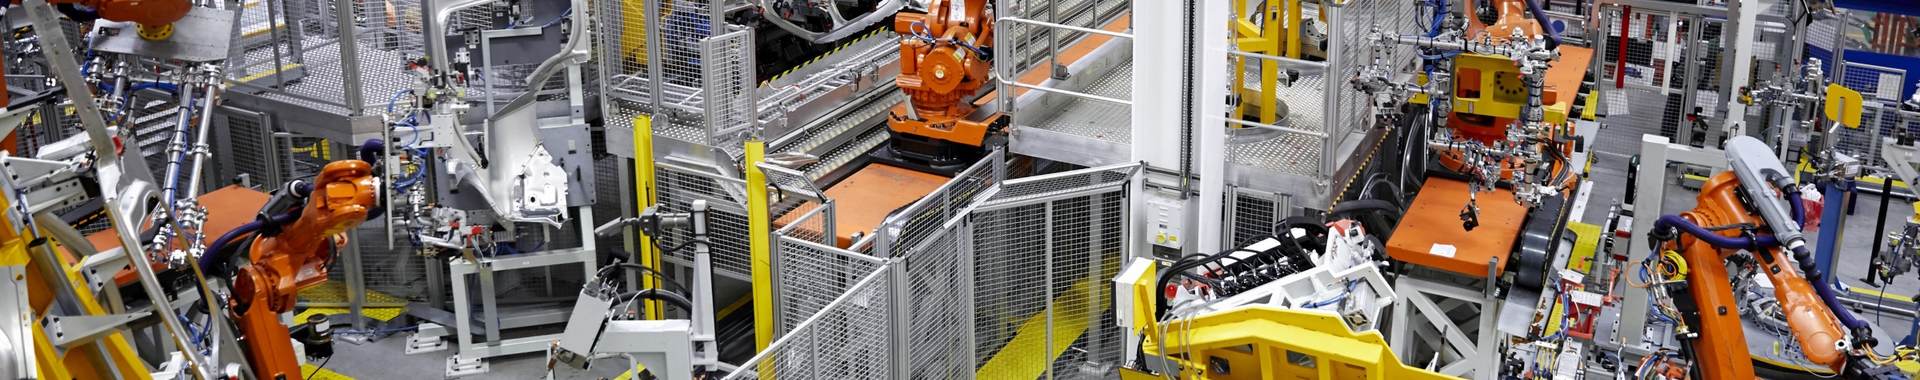 Robots putting cars together in a factory